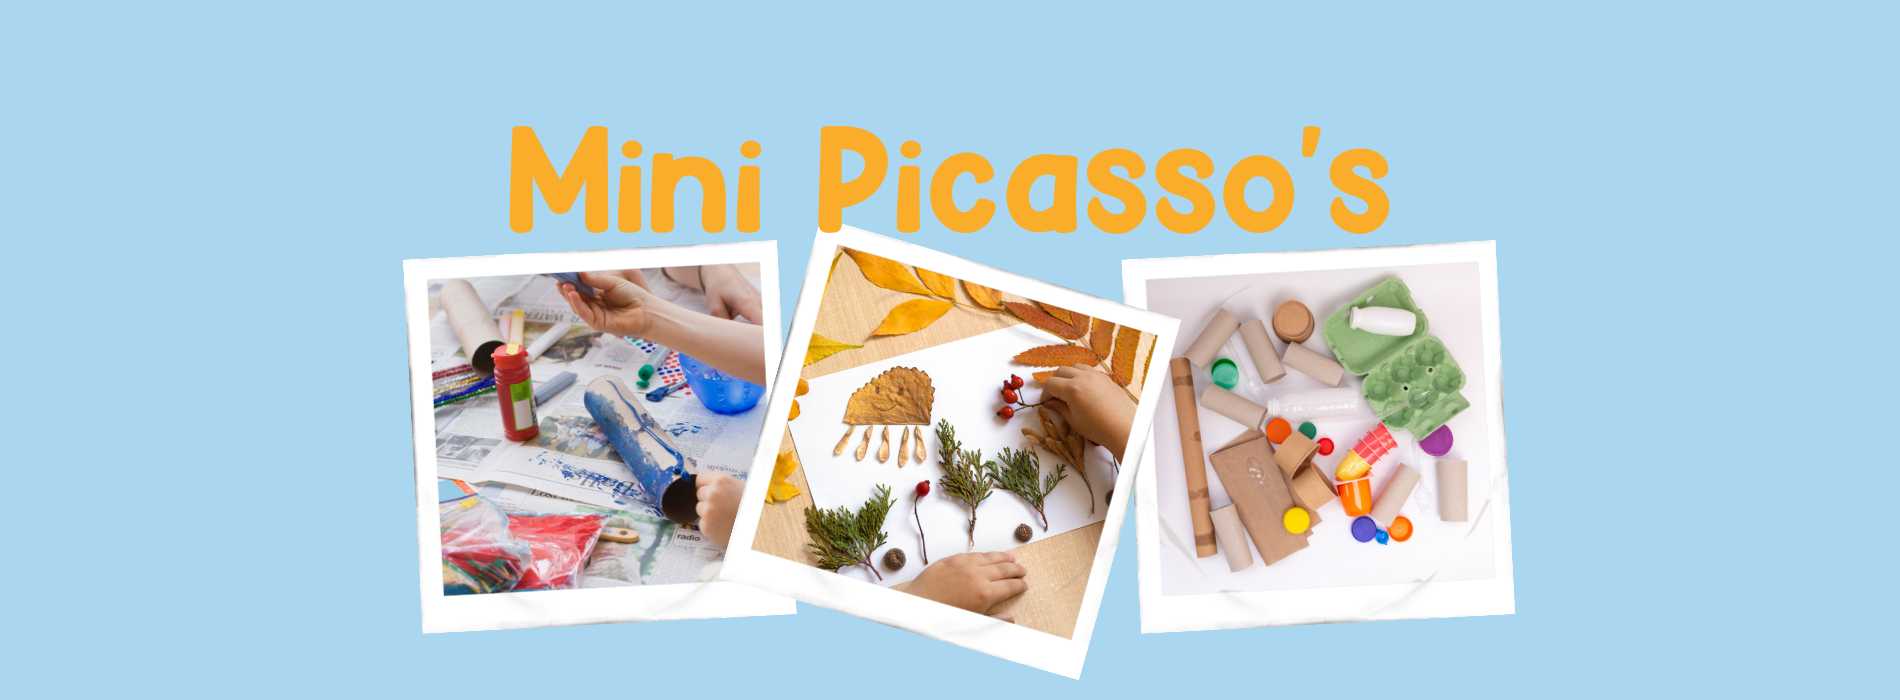 mini picasso's process art authentic play class gives your child the chance to experience creating art with a wide range of materials